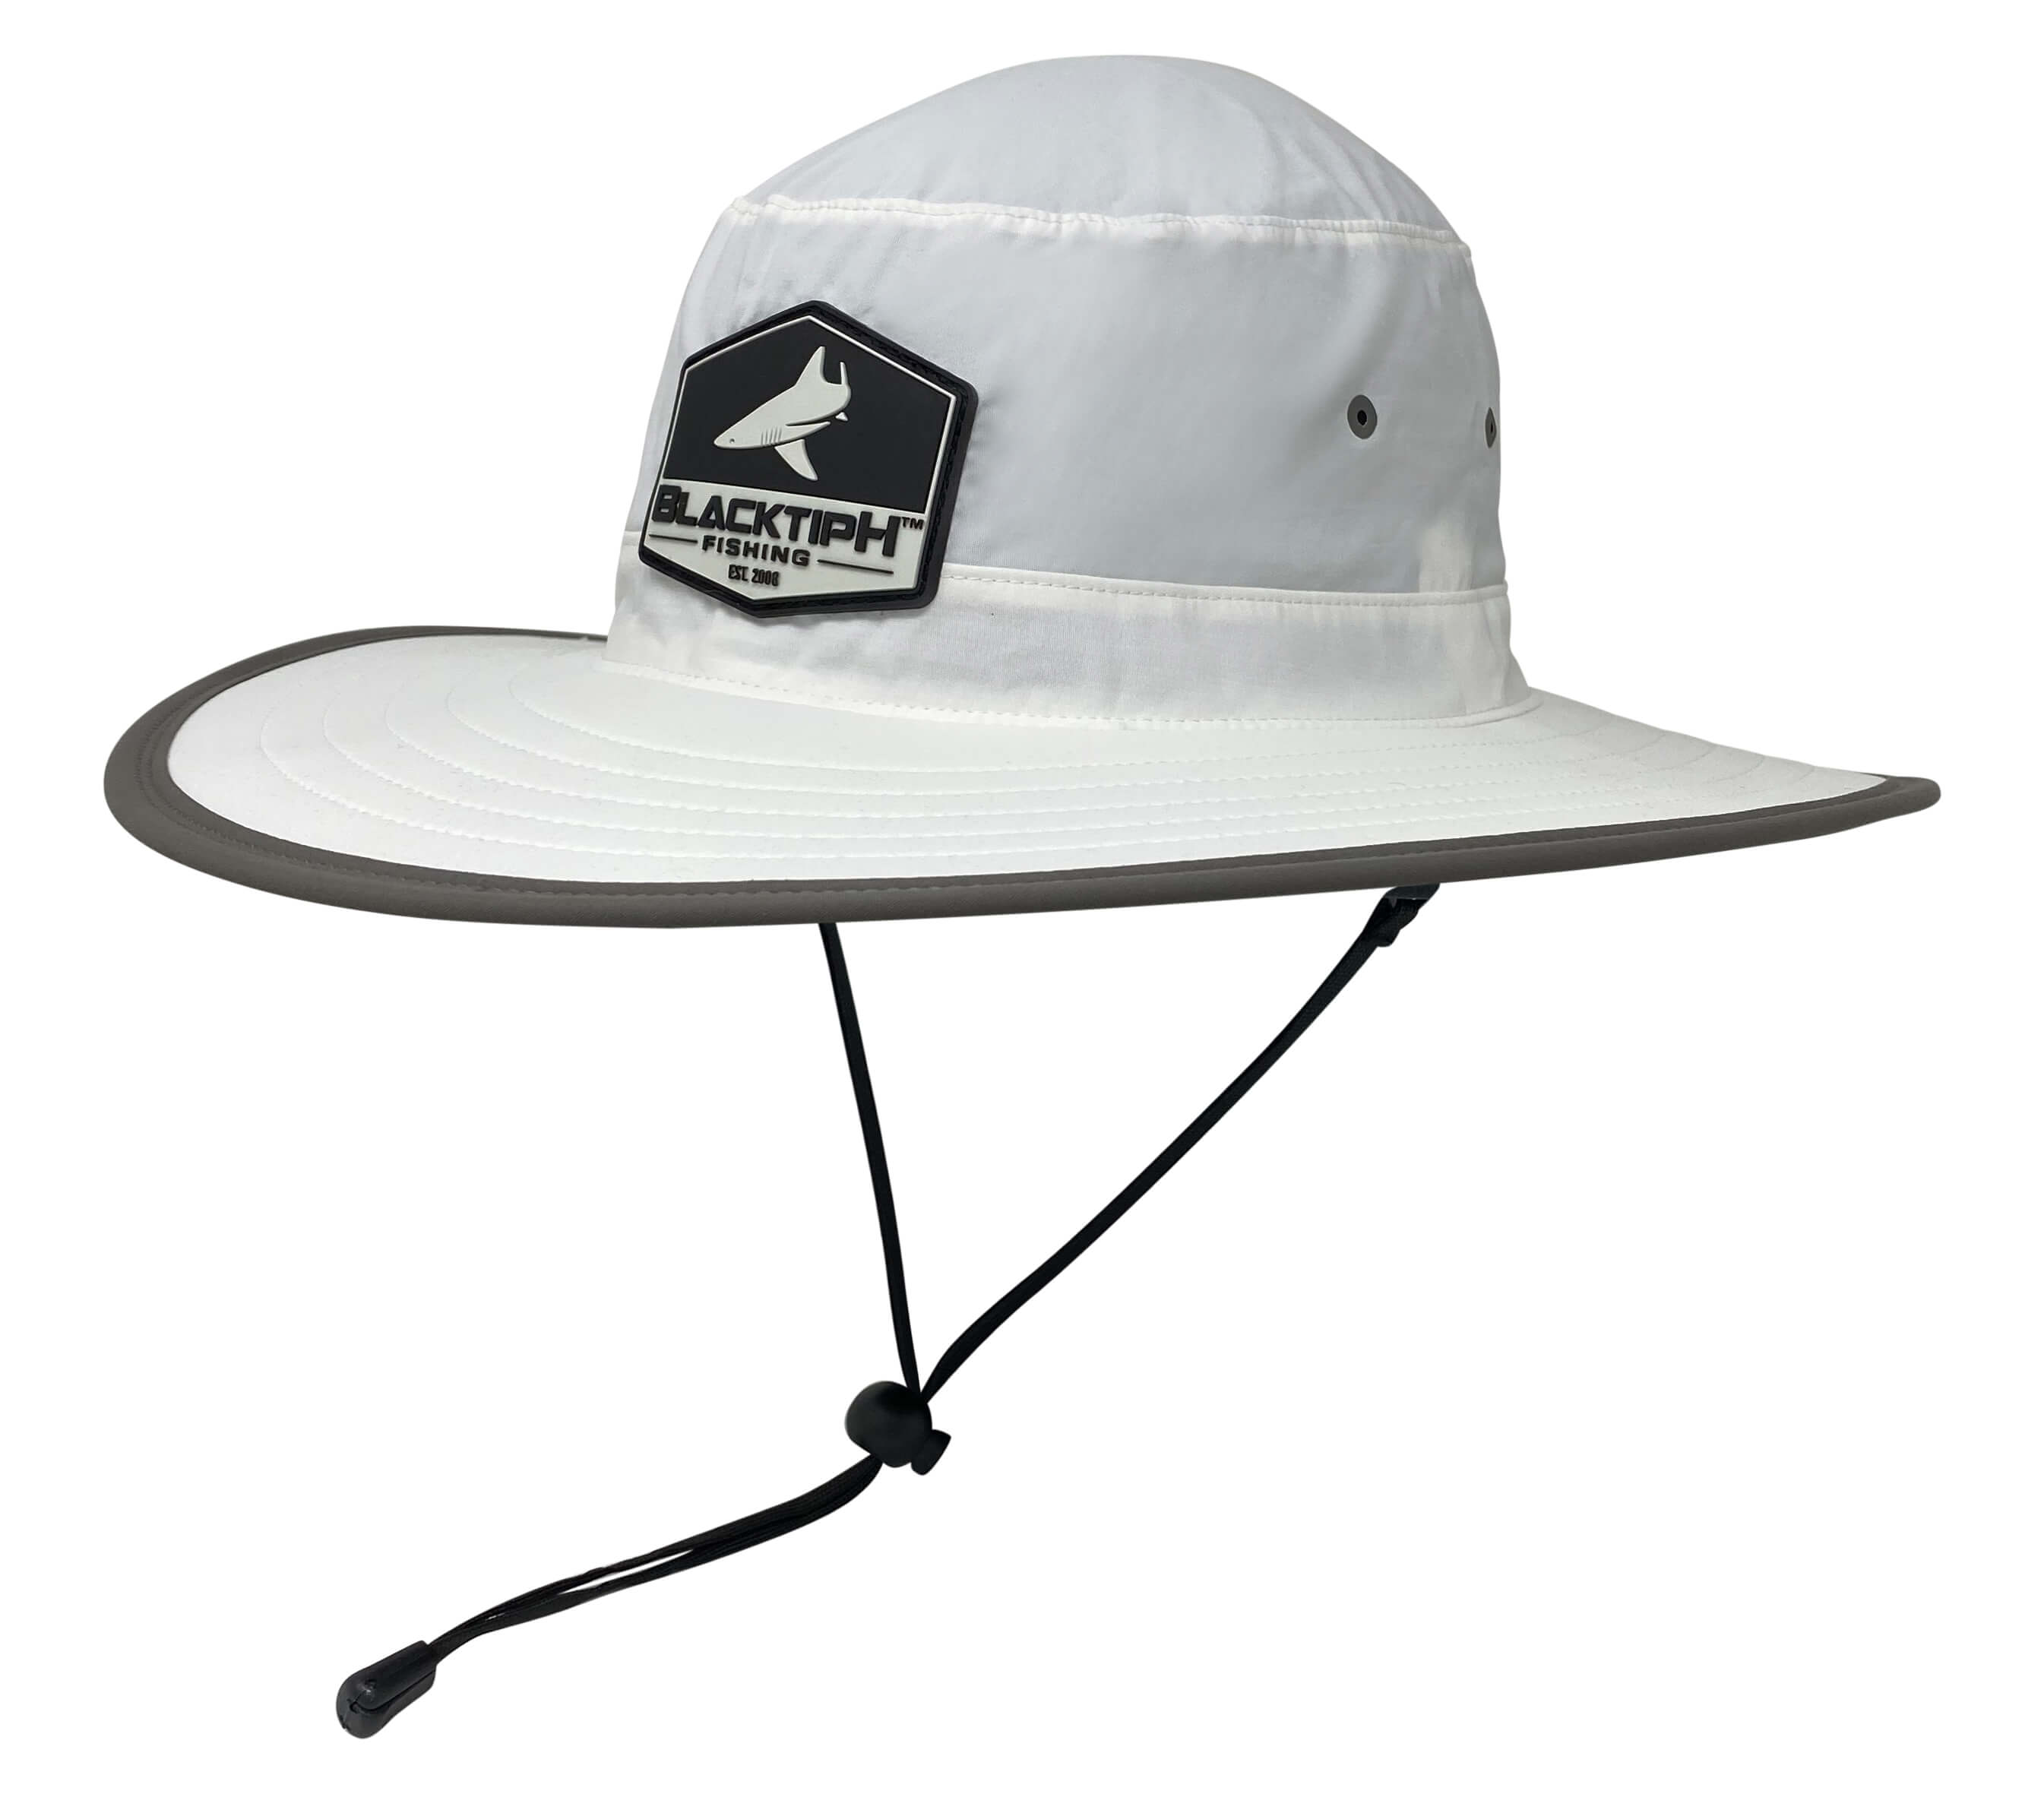 BlacktipH Bucket Fishing Hat in White with Charcoal Rim | Size Small/Medium